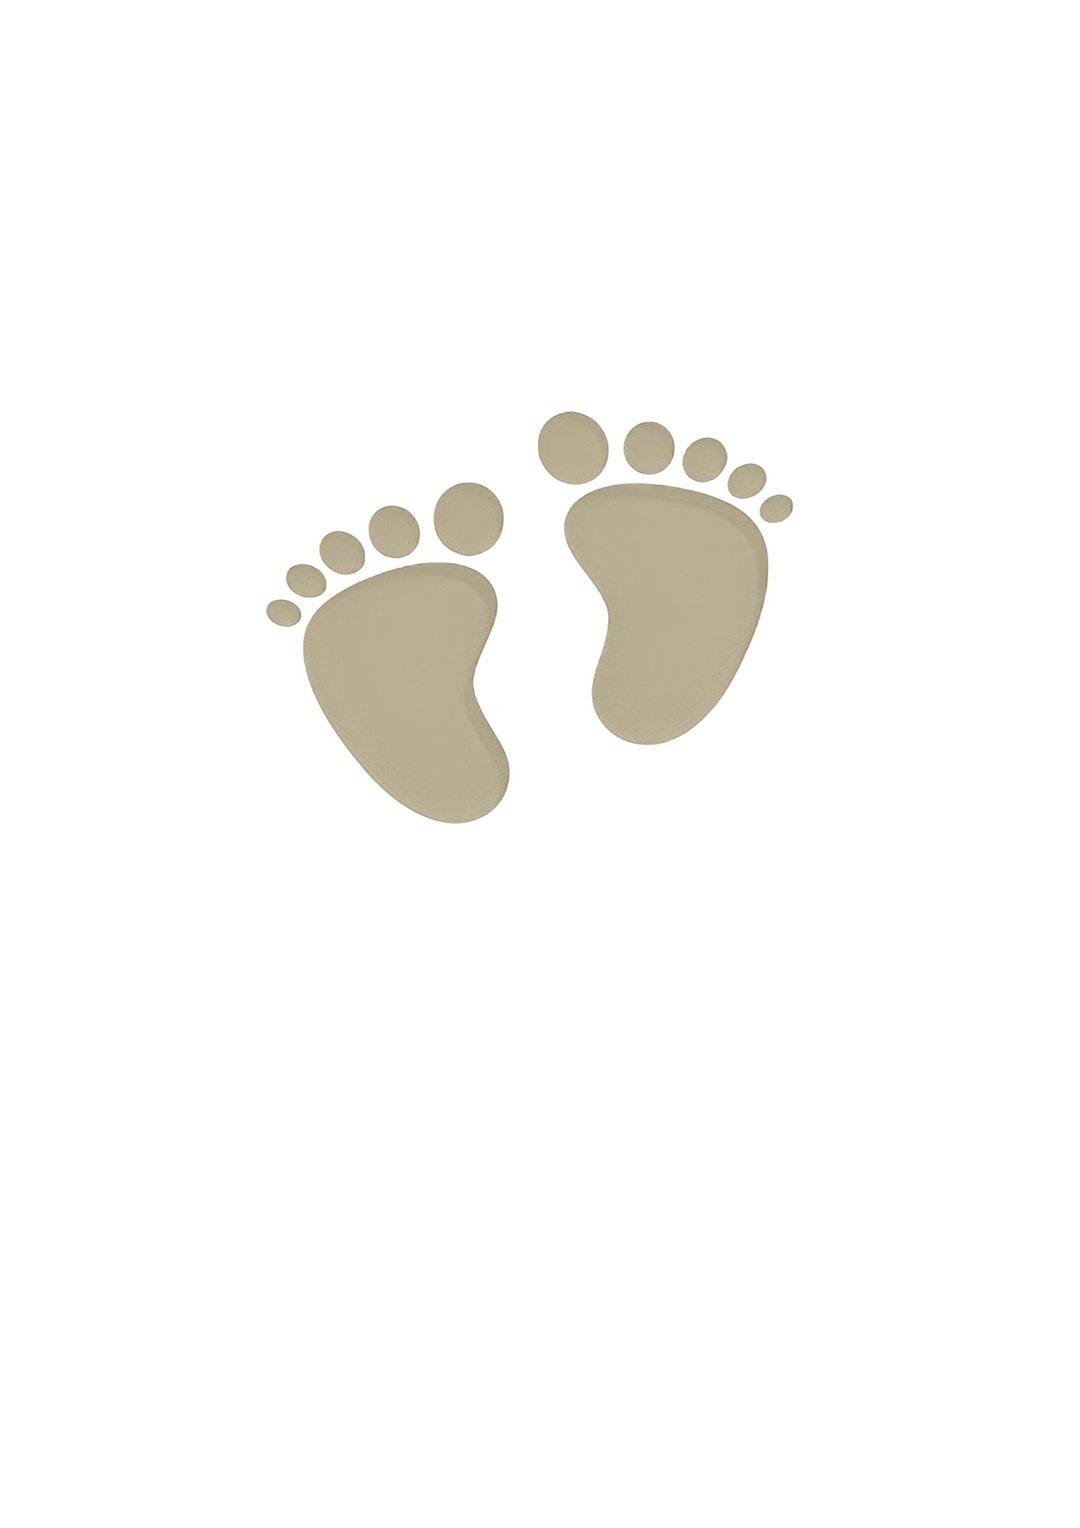 Baby Footprint Baby Feet-brown Color SVG Instant Download - Etsy